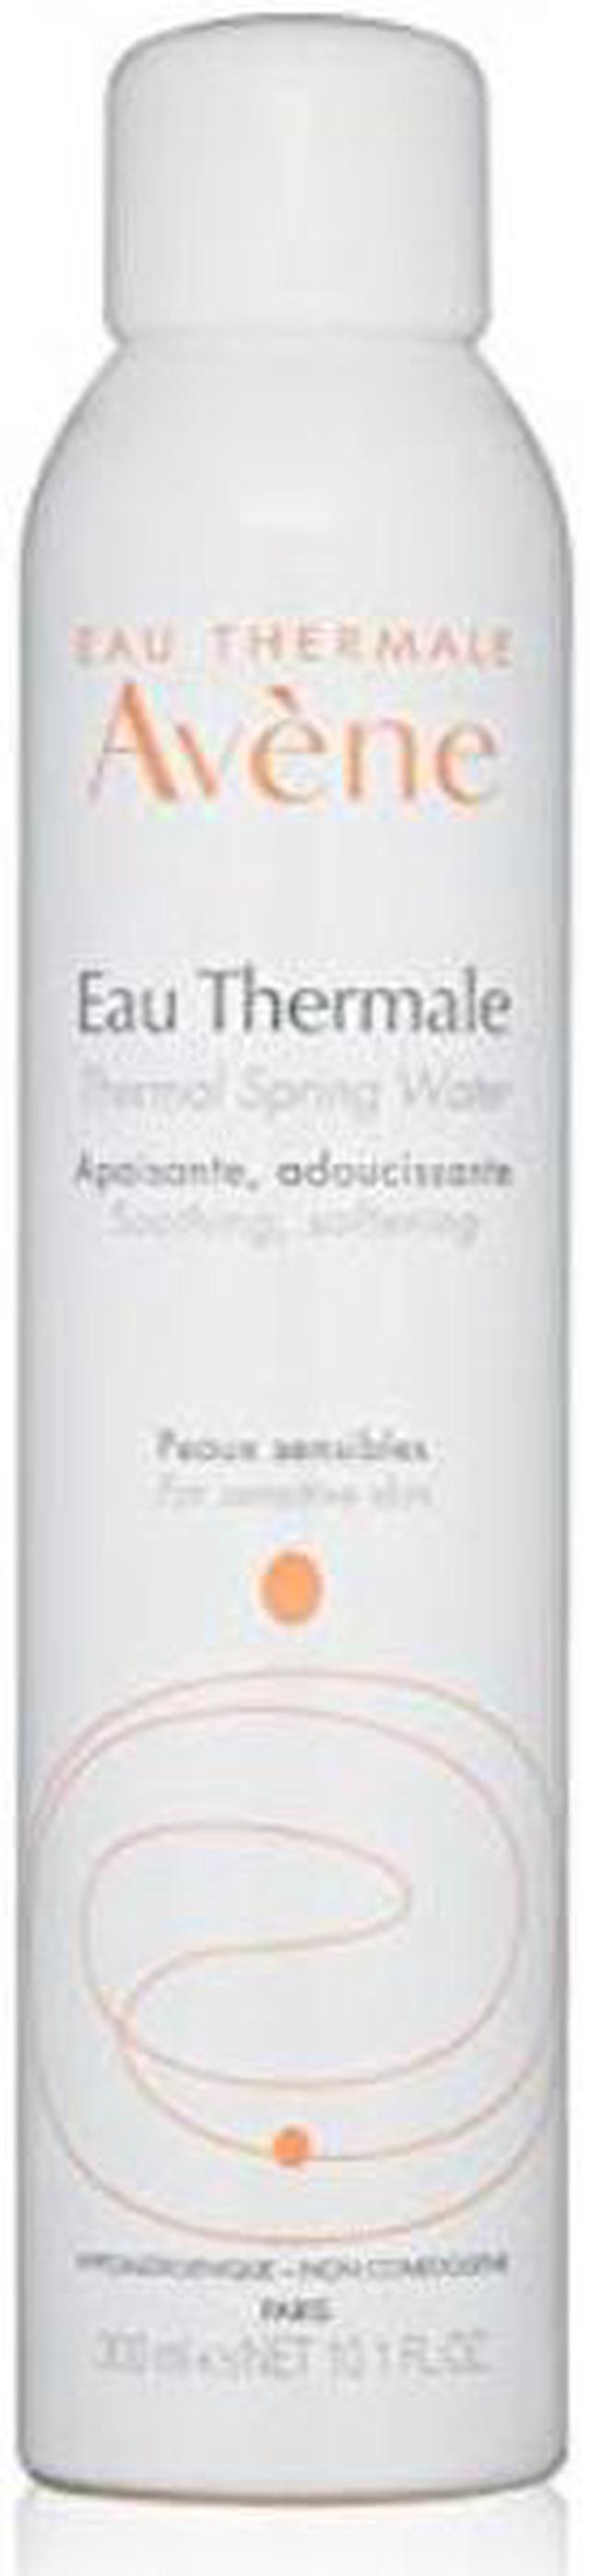 Eau Thermale Avene Thermal Spring Water, Soothing Calming Facial Mist Spray  for Sensitive Skin